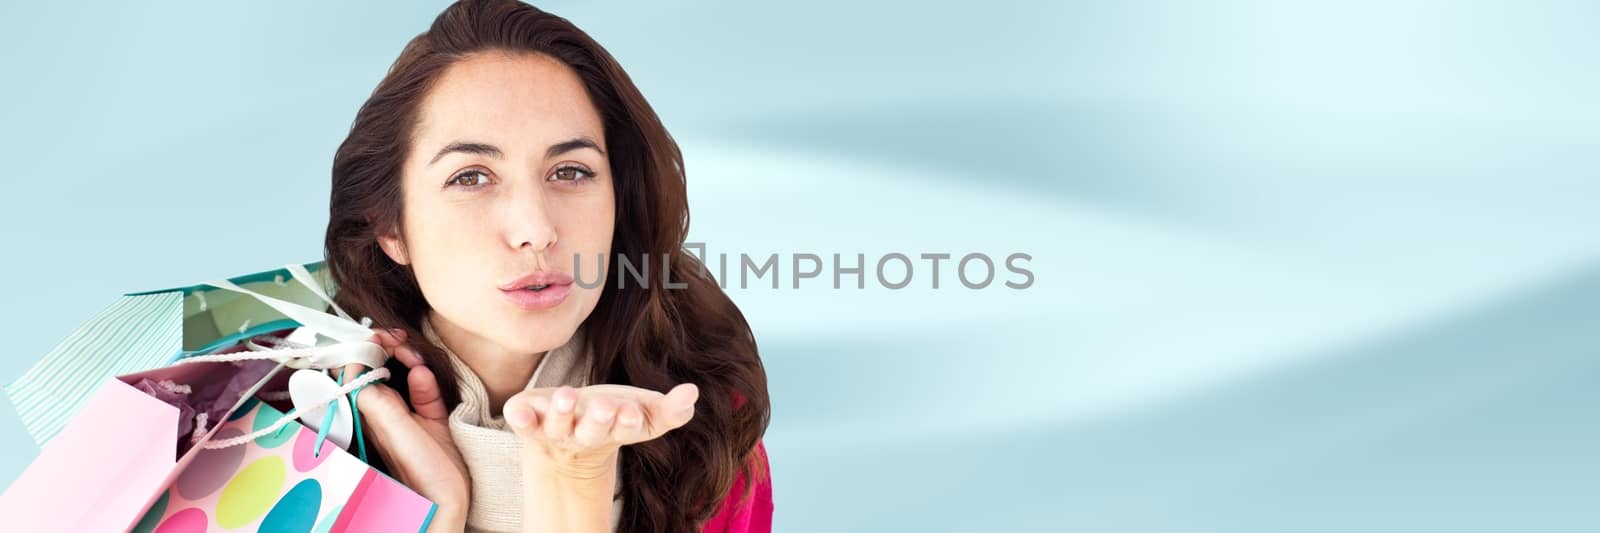 Digital composite of Shopper with bags and blowing kiss against blurry blue abstract background